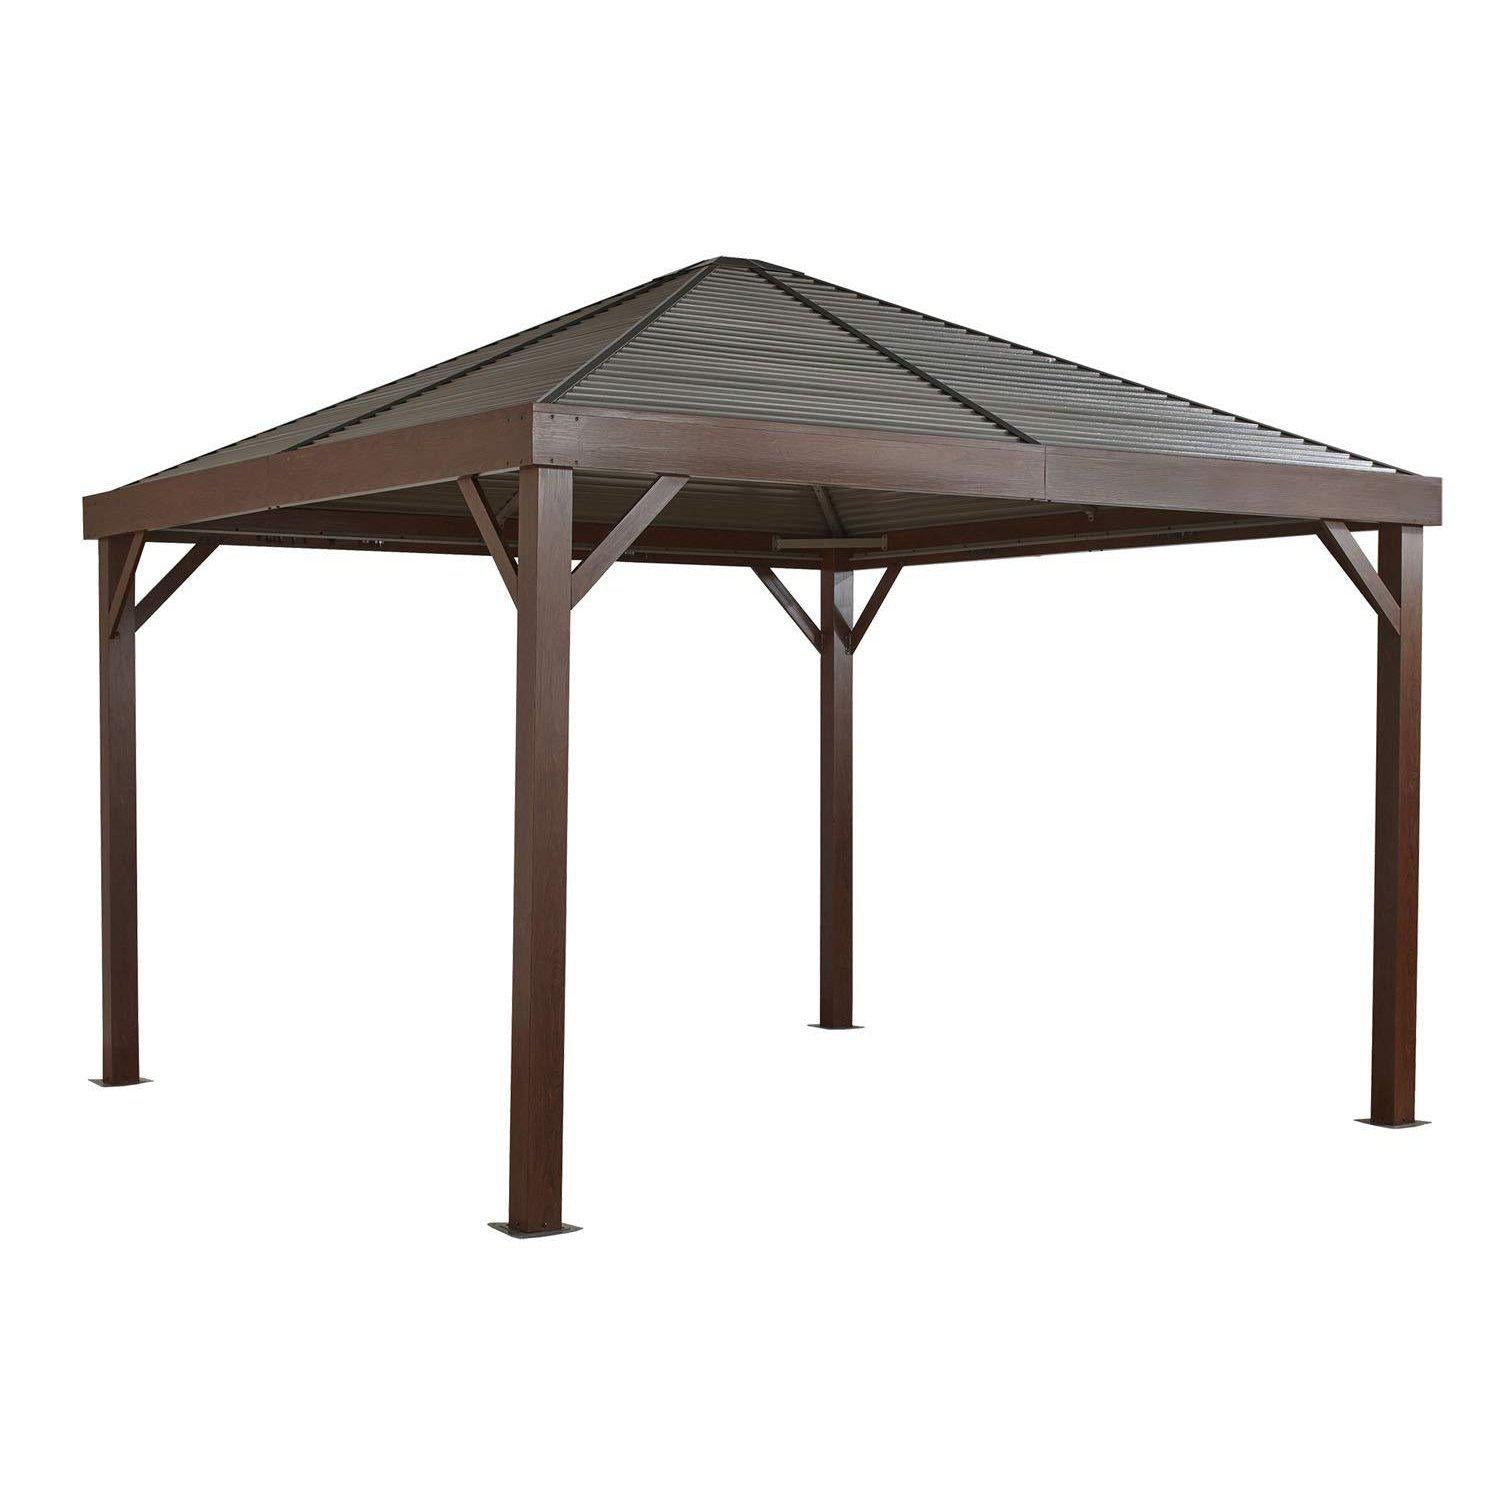 Sojag South Beach Hardtop Gazebo in Wood Finish and Taupe Panels - 12 x 12 Ft